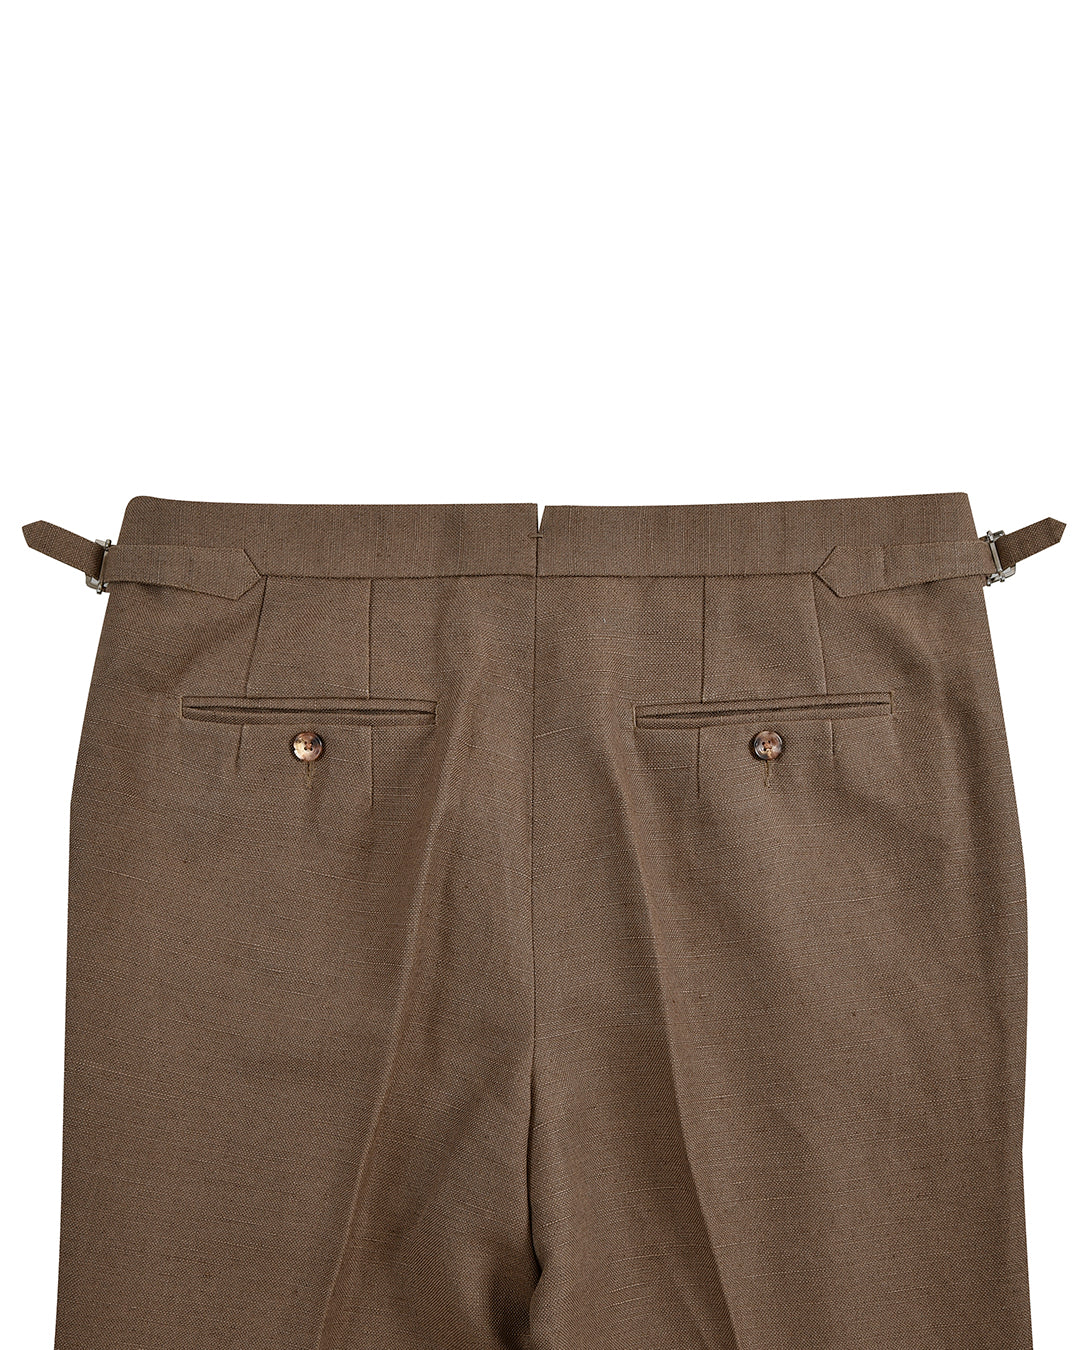 Back view of custom linen canvas pants for men by Luxire in brown